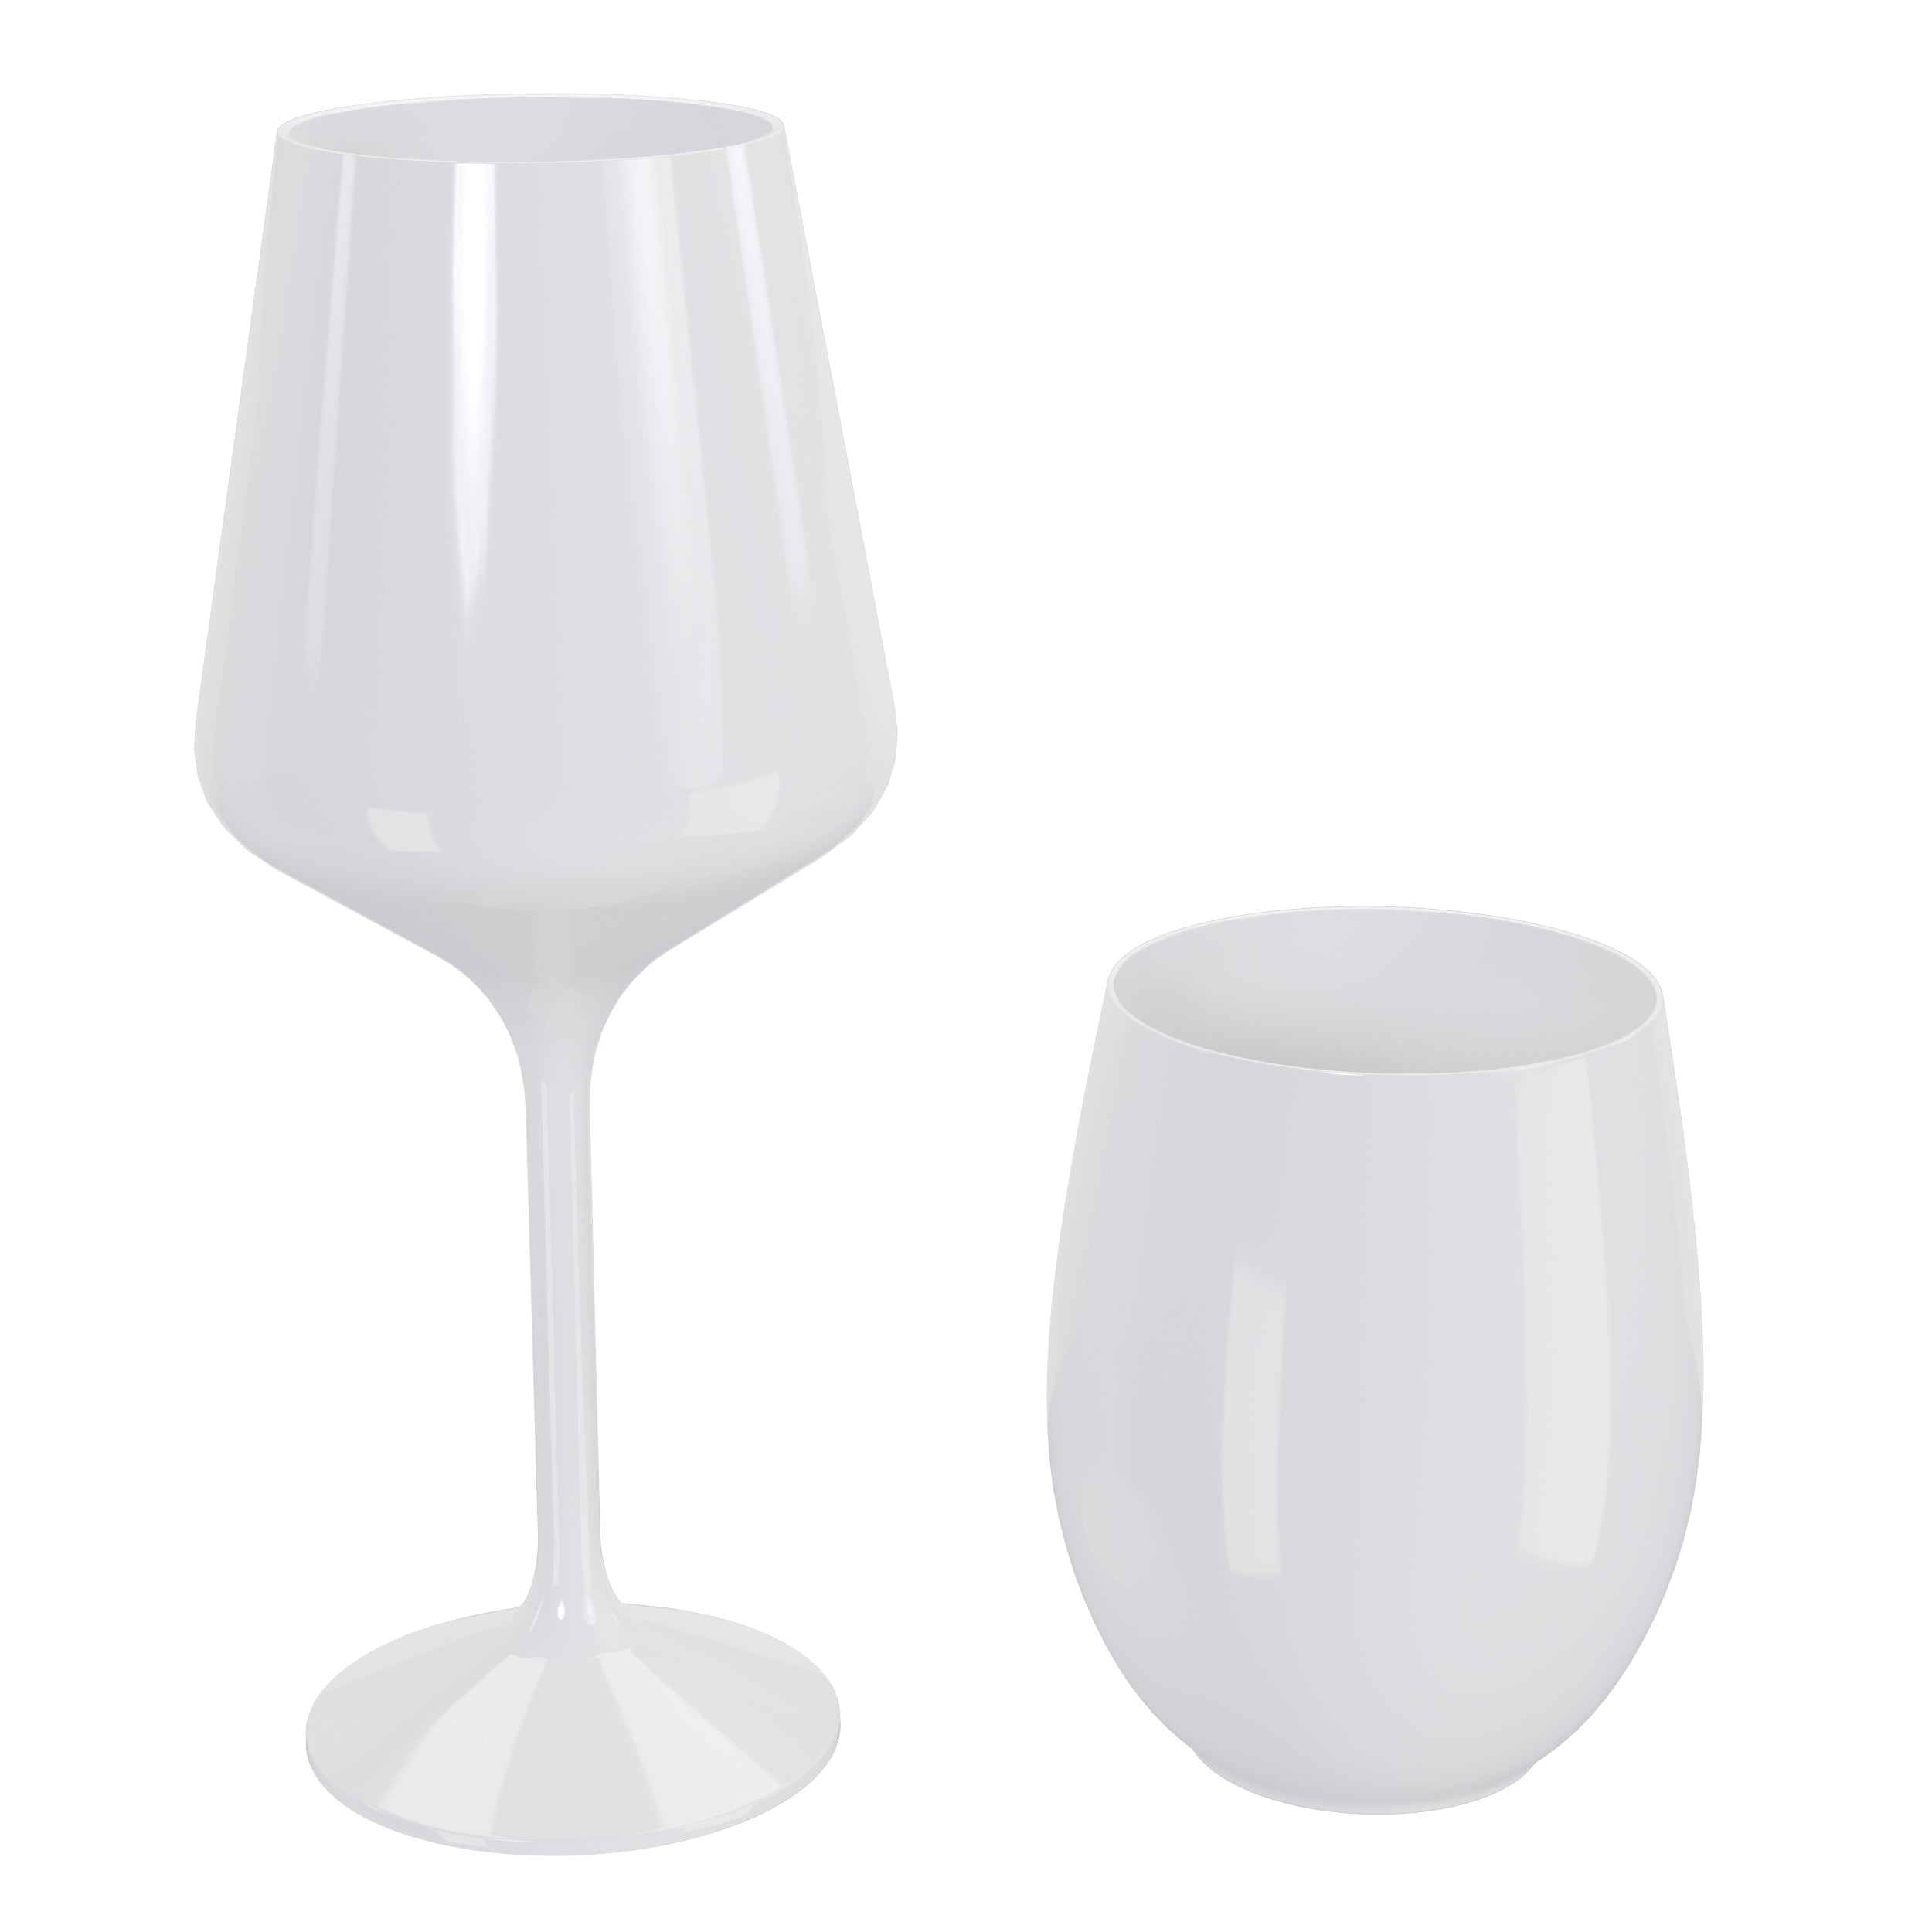 Reusable 16 Oz. White Stemmed Wine Cup | 12 Count